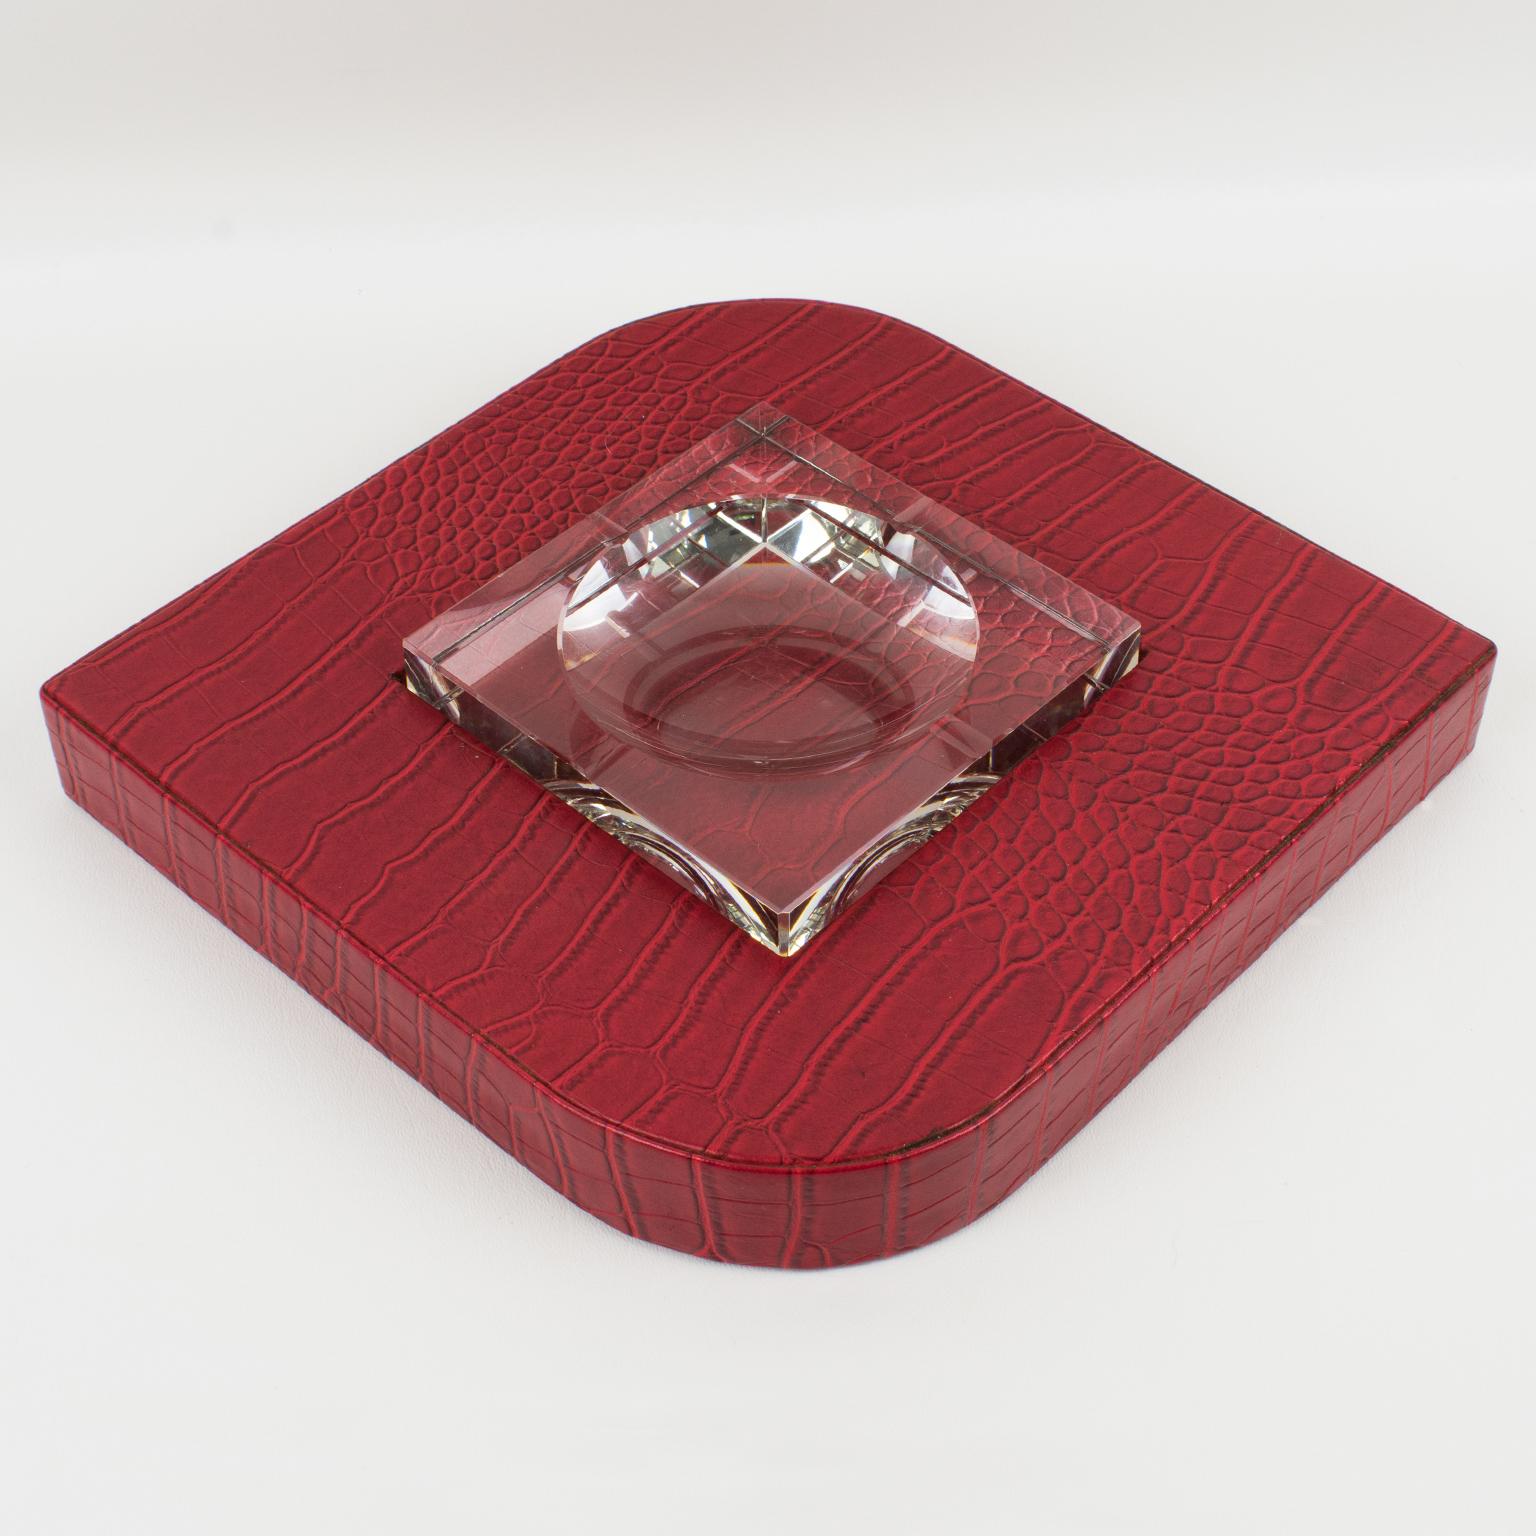 Art Deco Dupre Lafon Style Red Leather and Crystal Cigar Ashtray Catchall Vide Poche